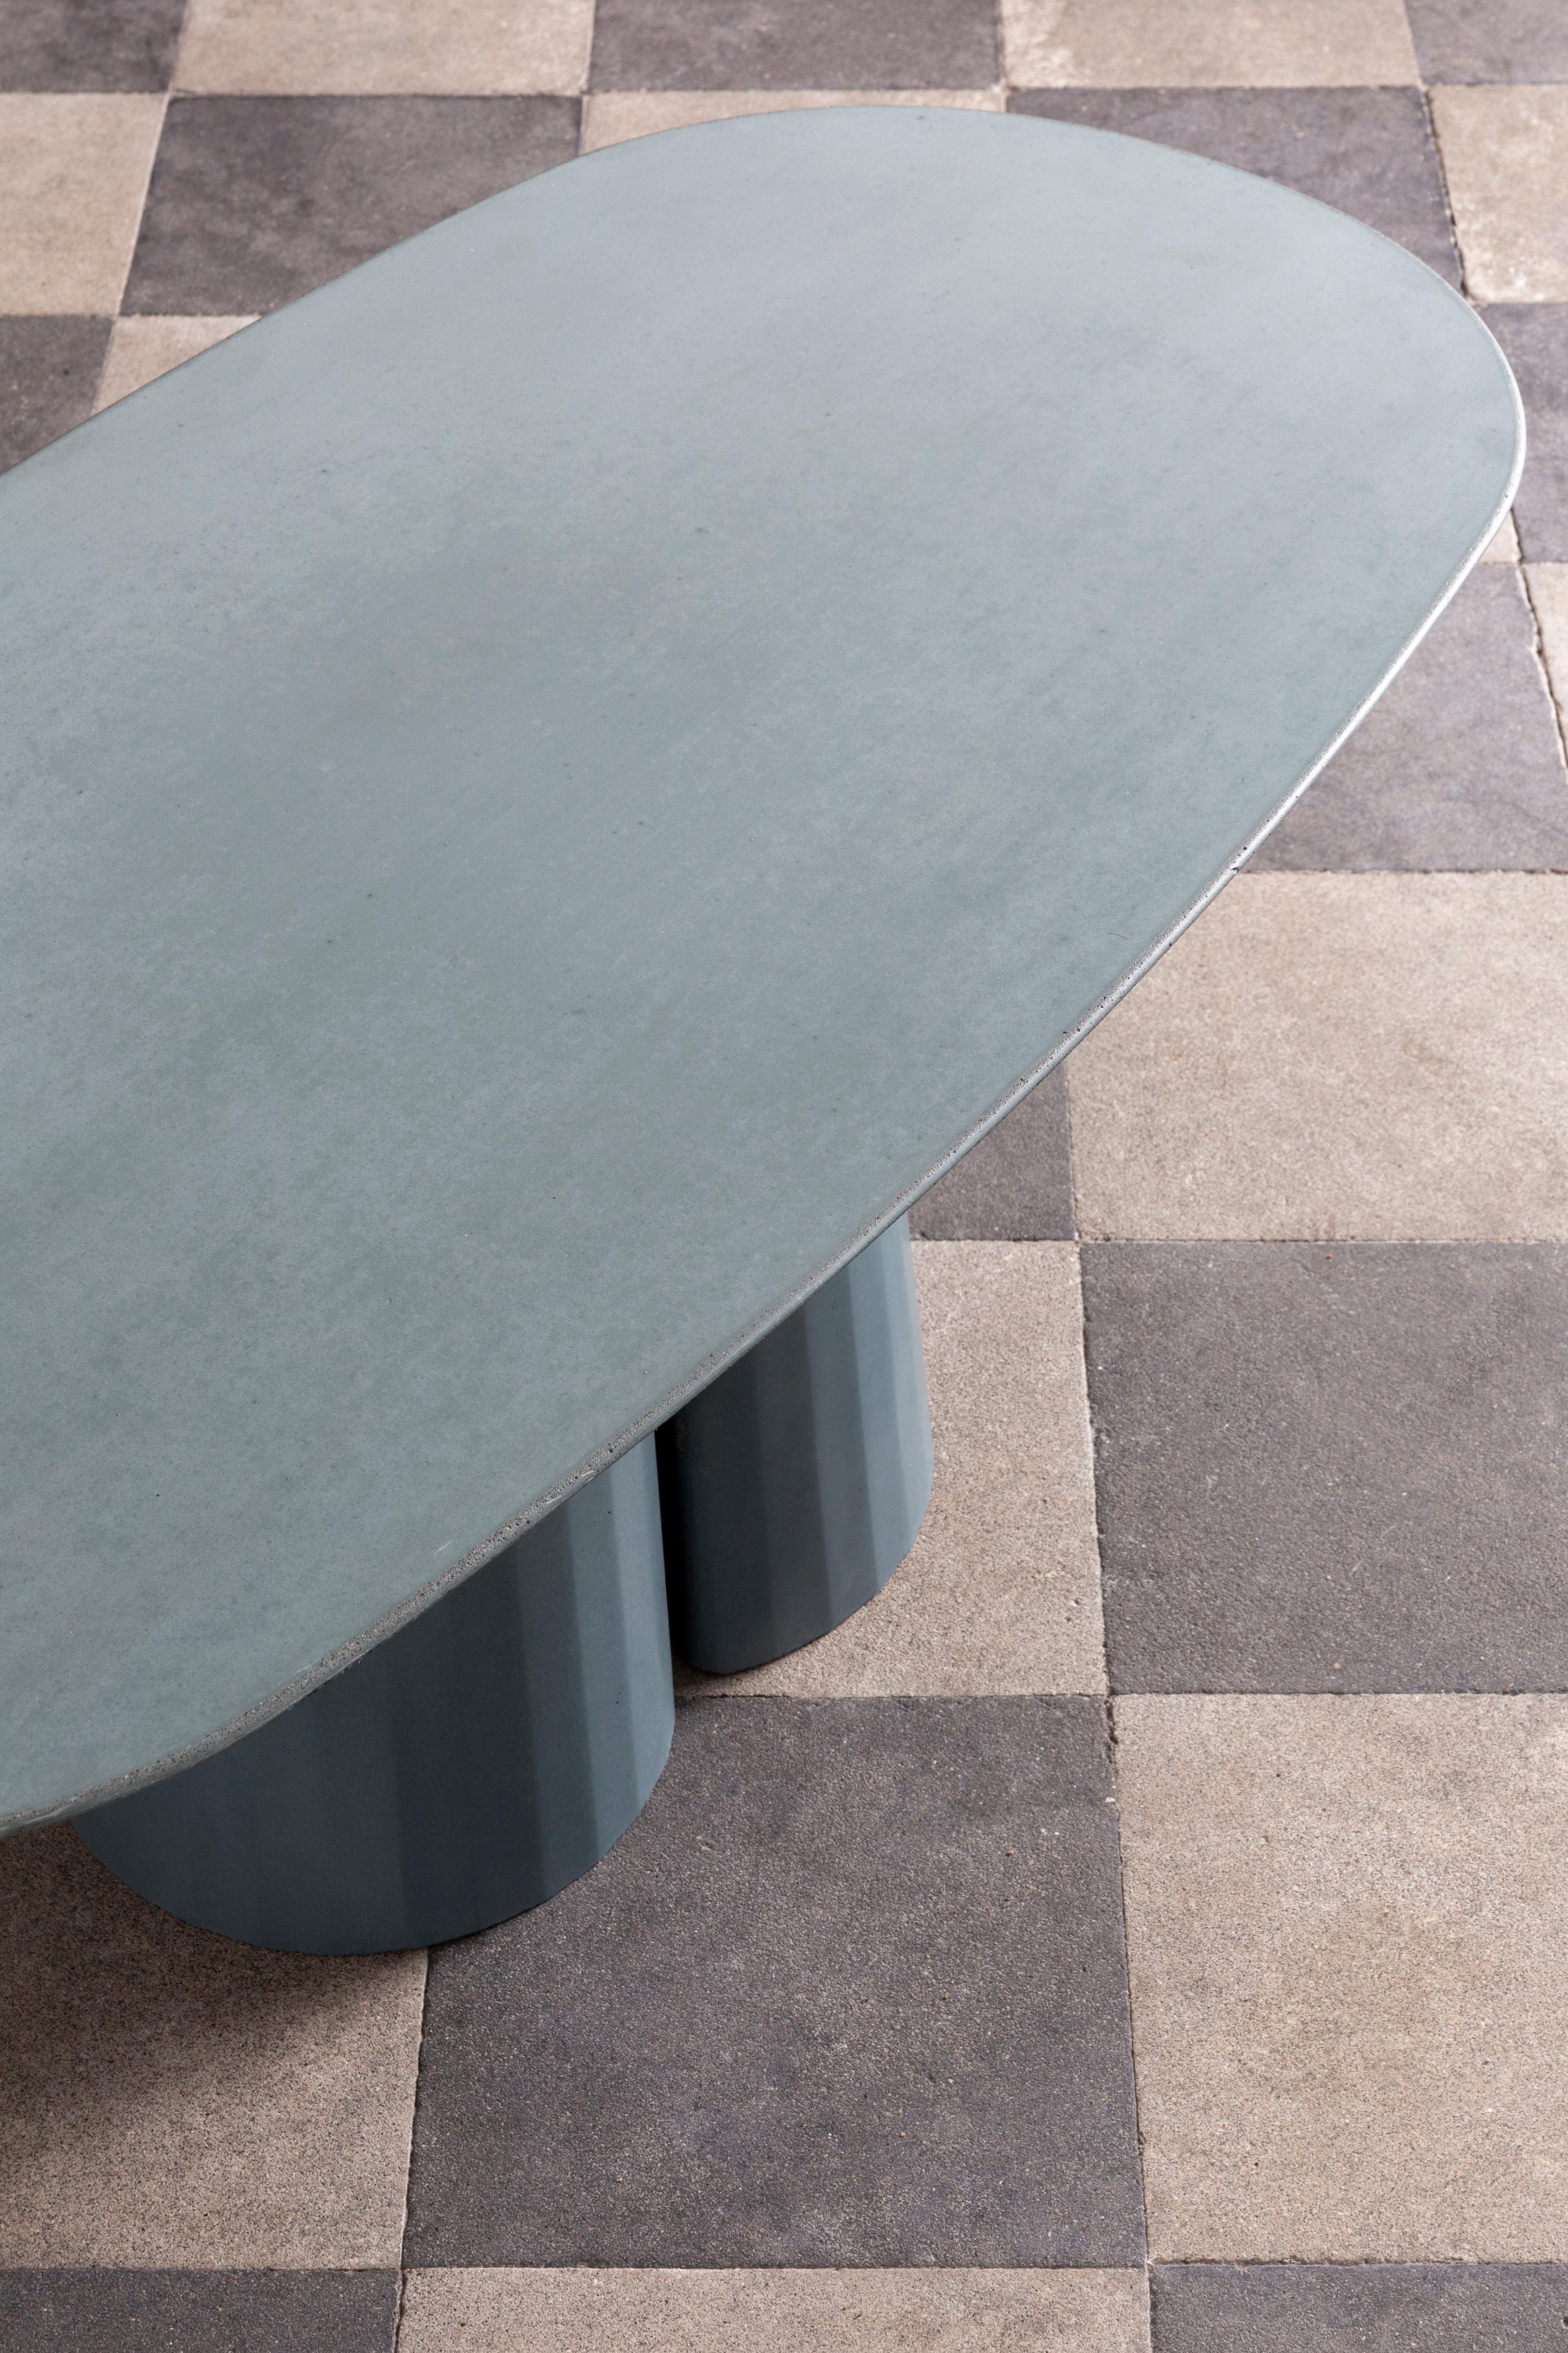 Molded Concrete Domestic Landscape Oval Coffee Table Ultramarine Cement Made in Italy For Sale